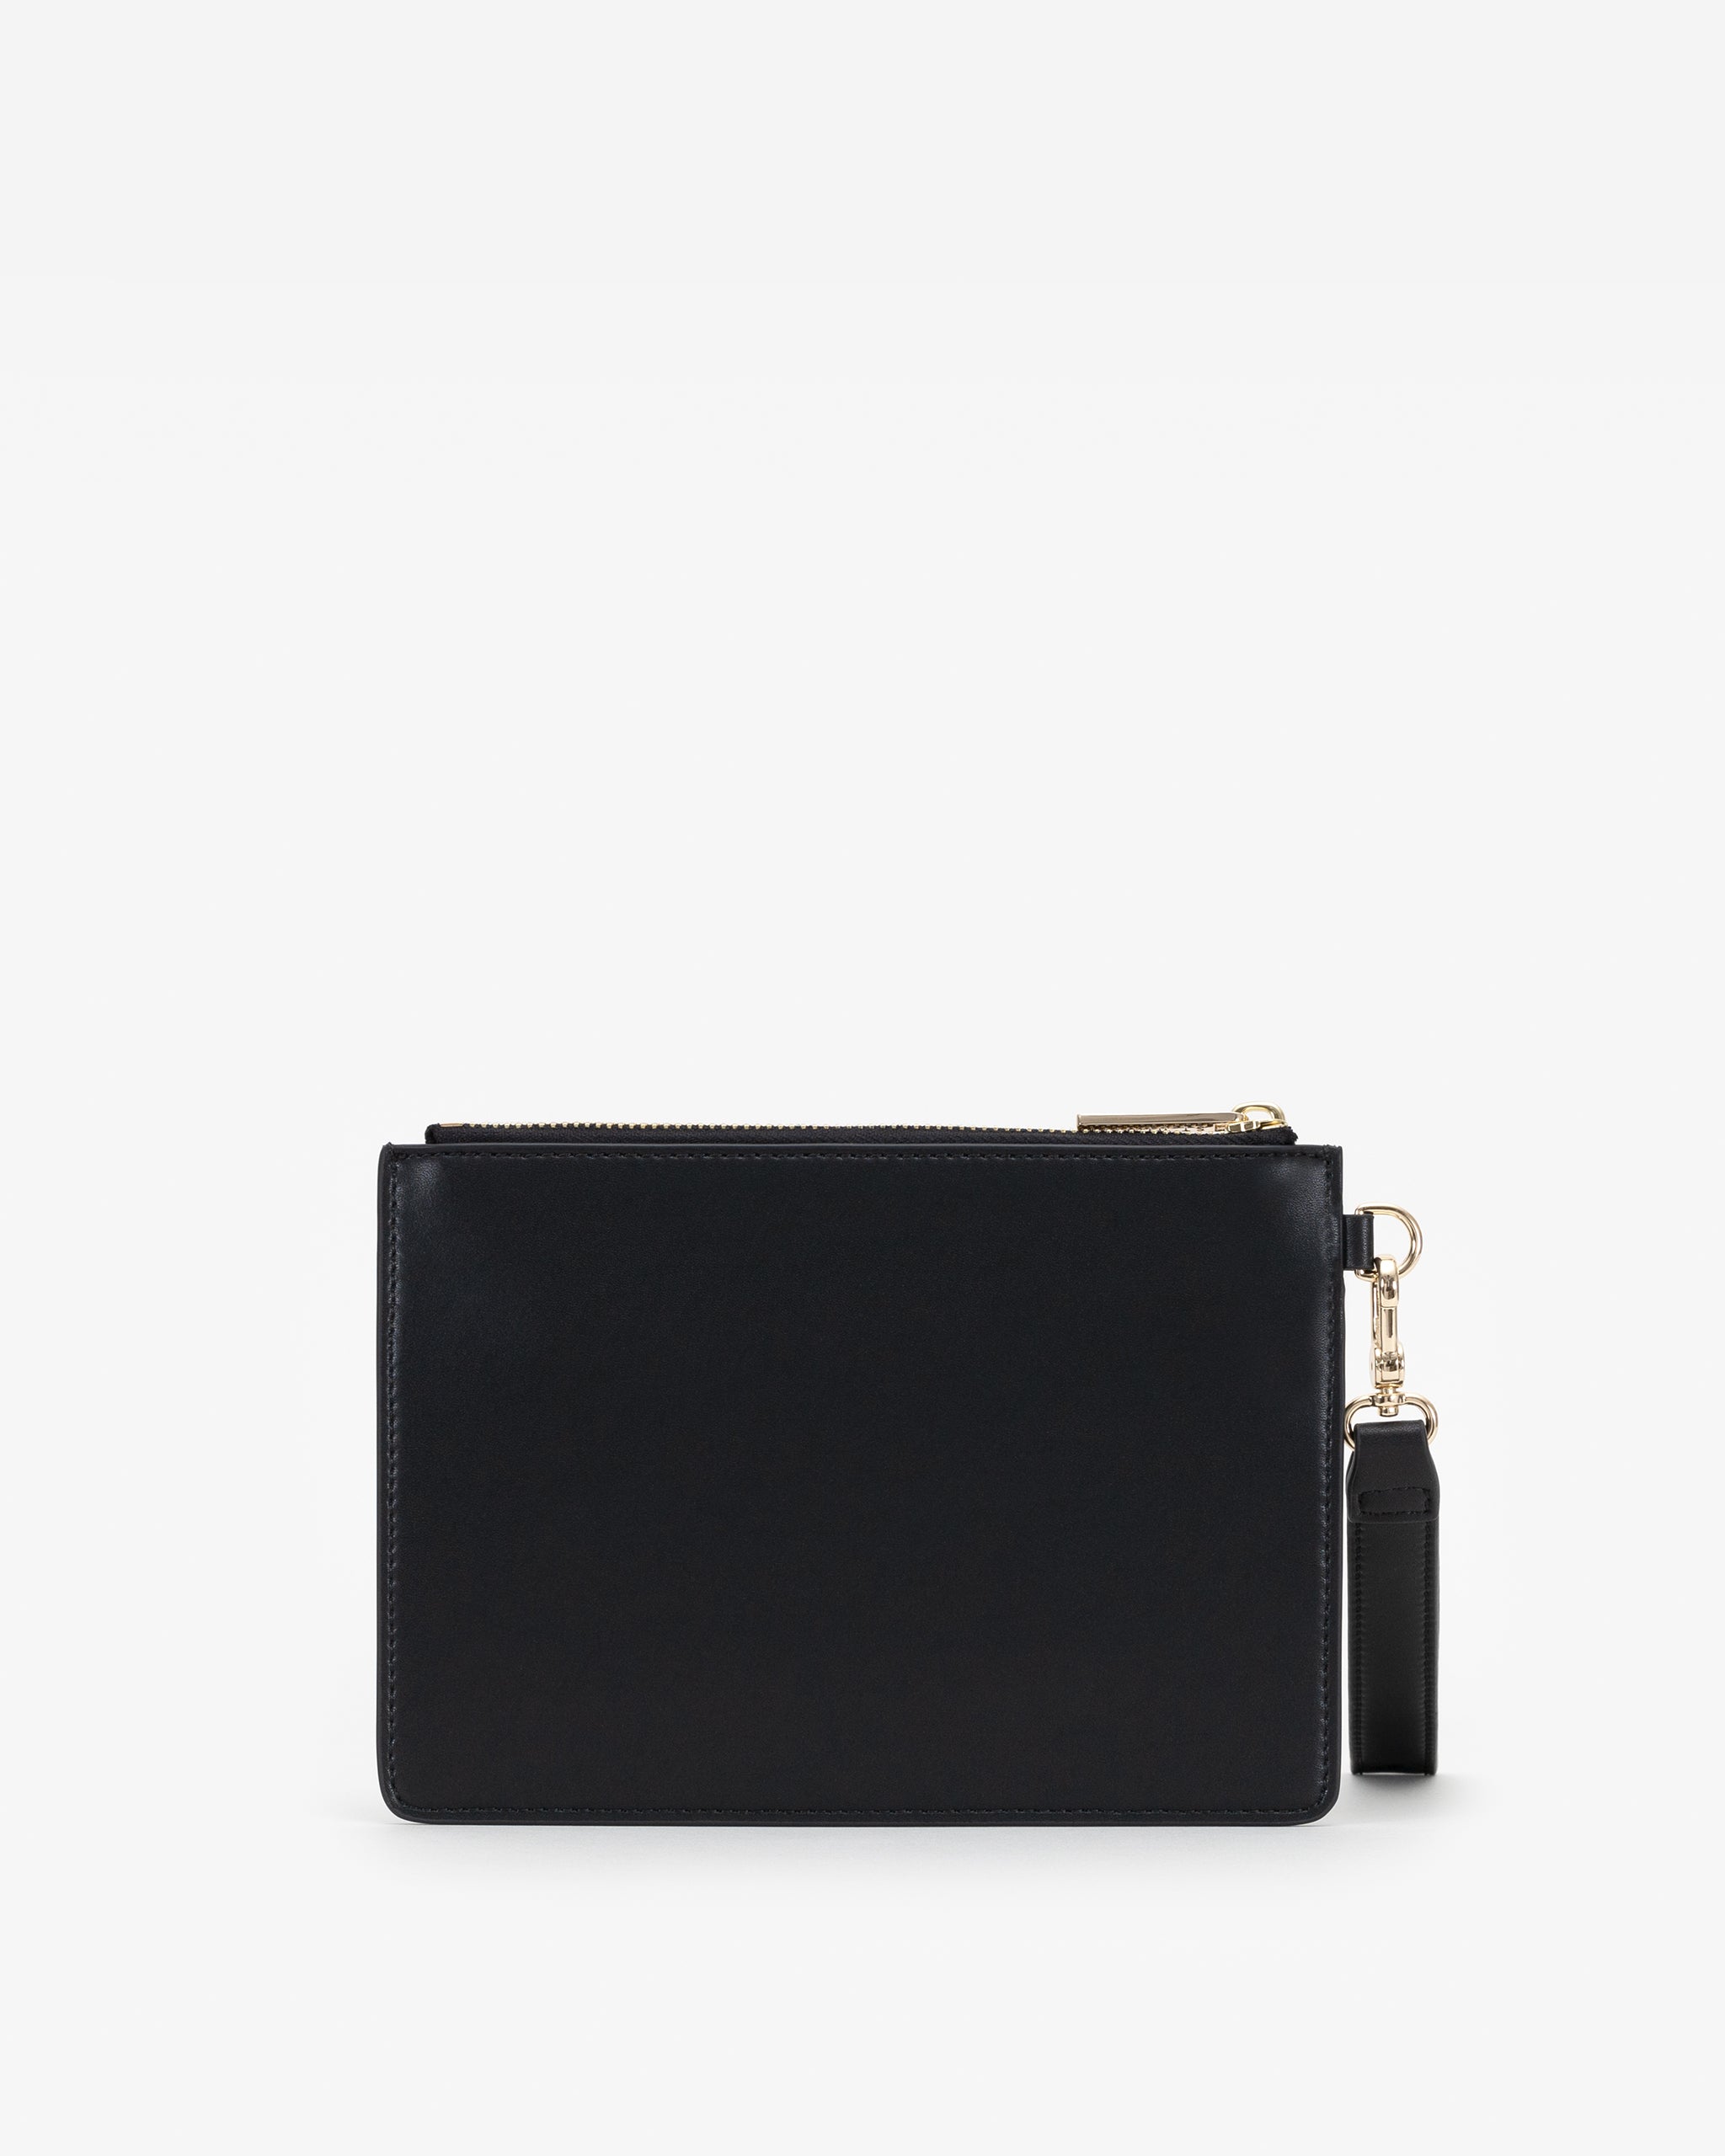 Classic Pouch in Black/Gold with Personalised Hardware